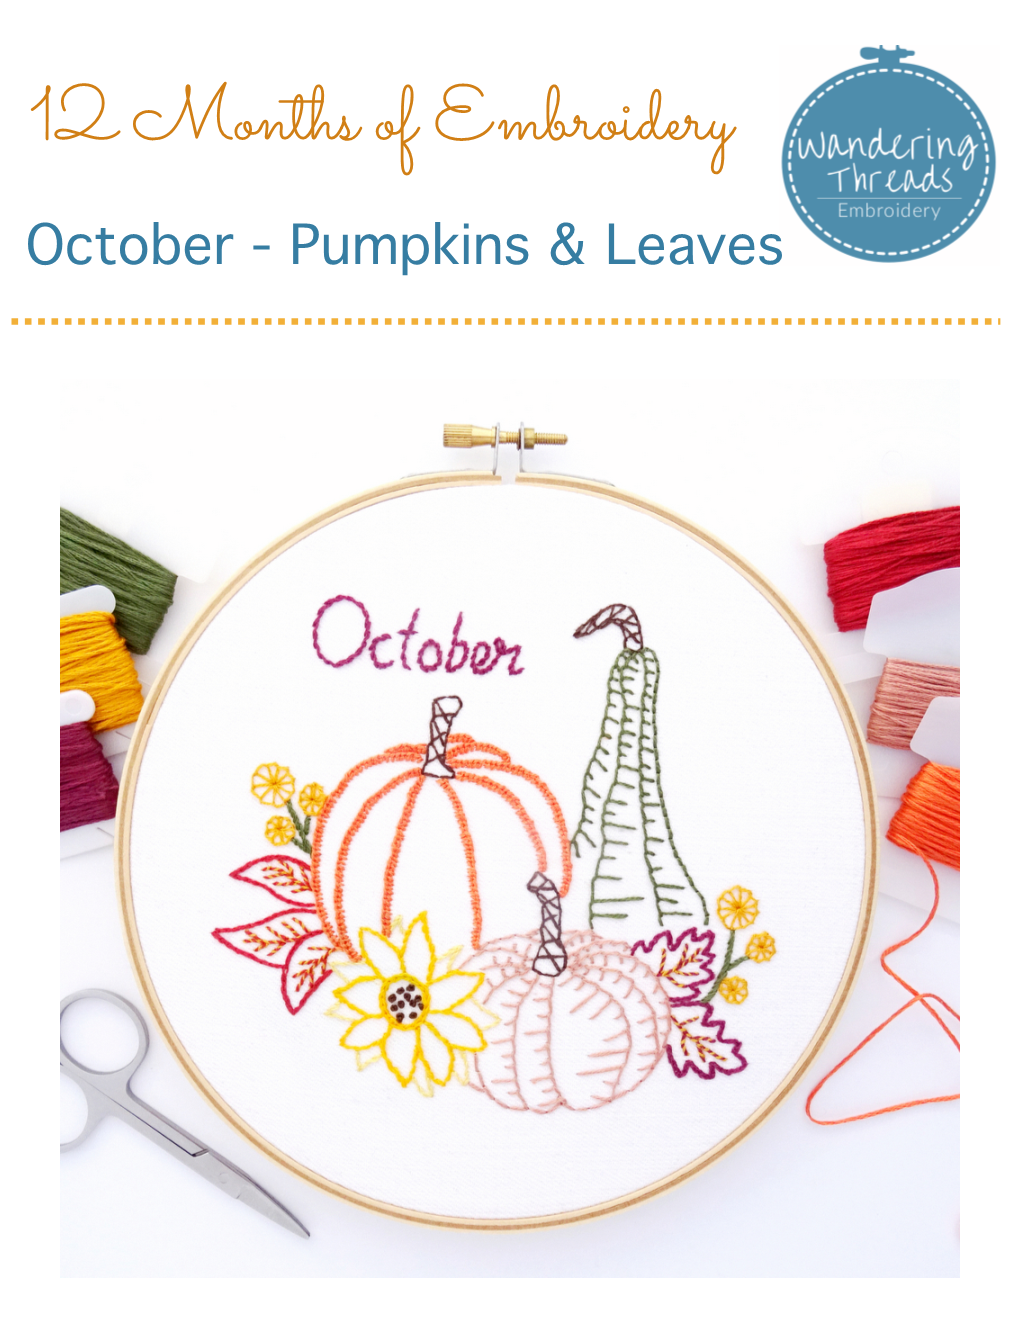 Pumpkins & Leaves 12 Months of Embroidery